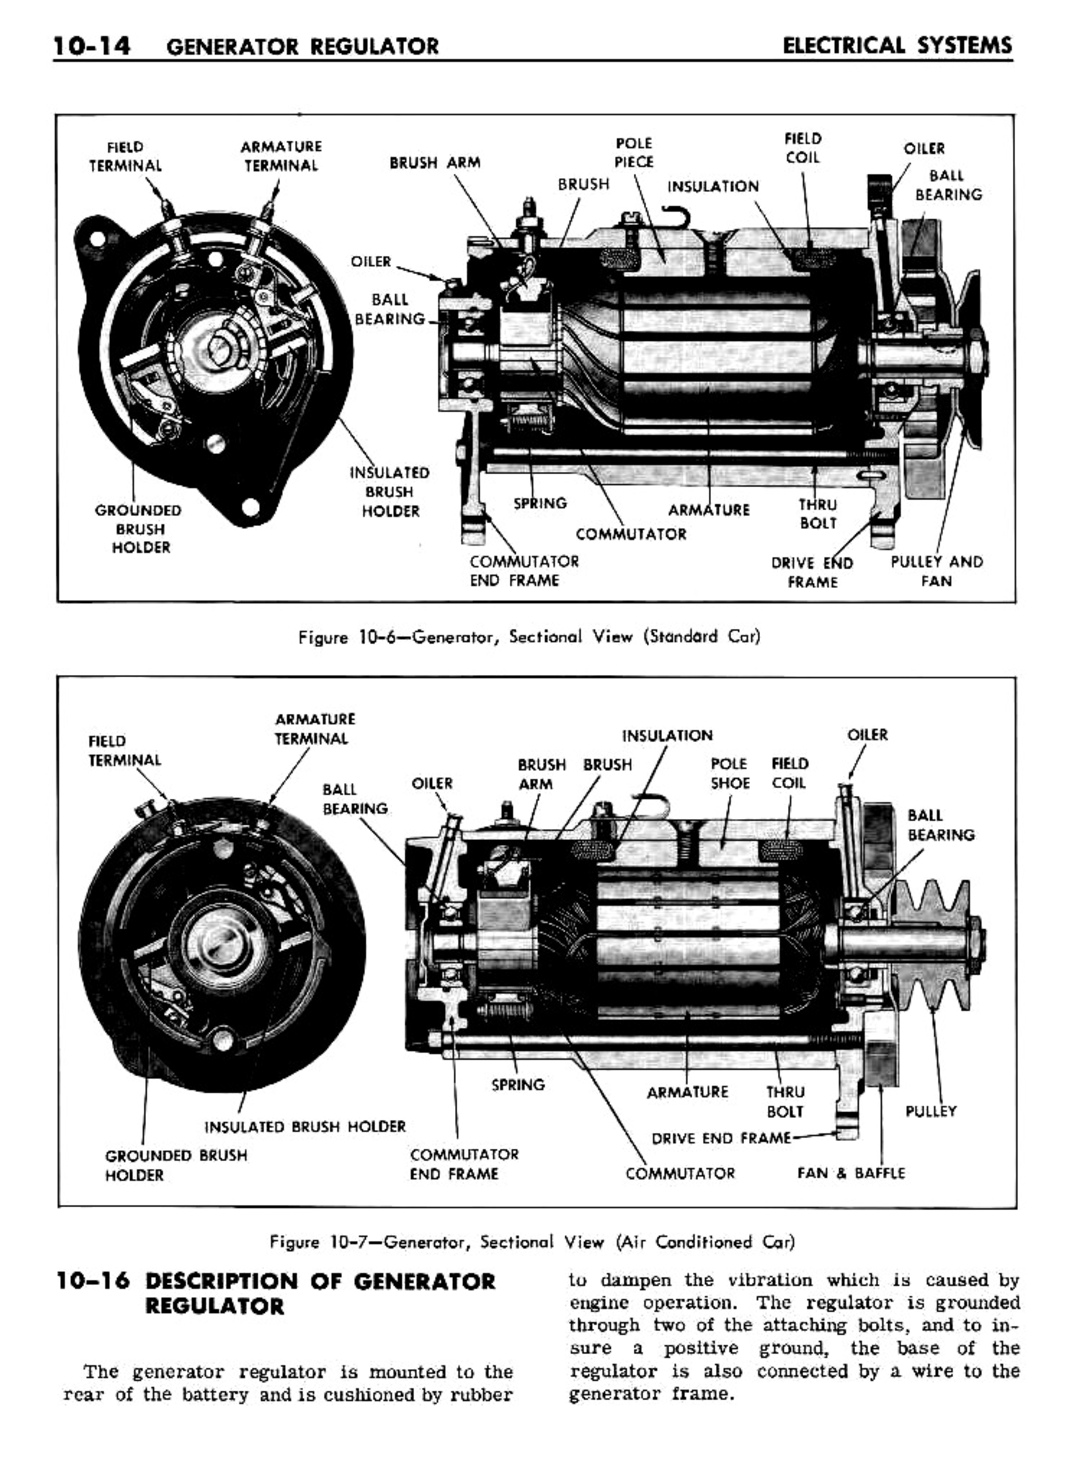 n_10 1961 Buick Shop Manual - Electrical Systems-014-014.jpg